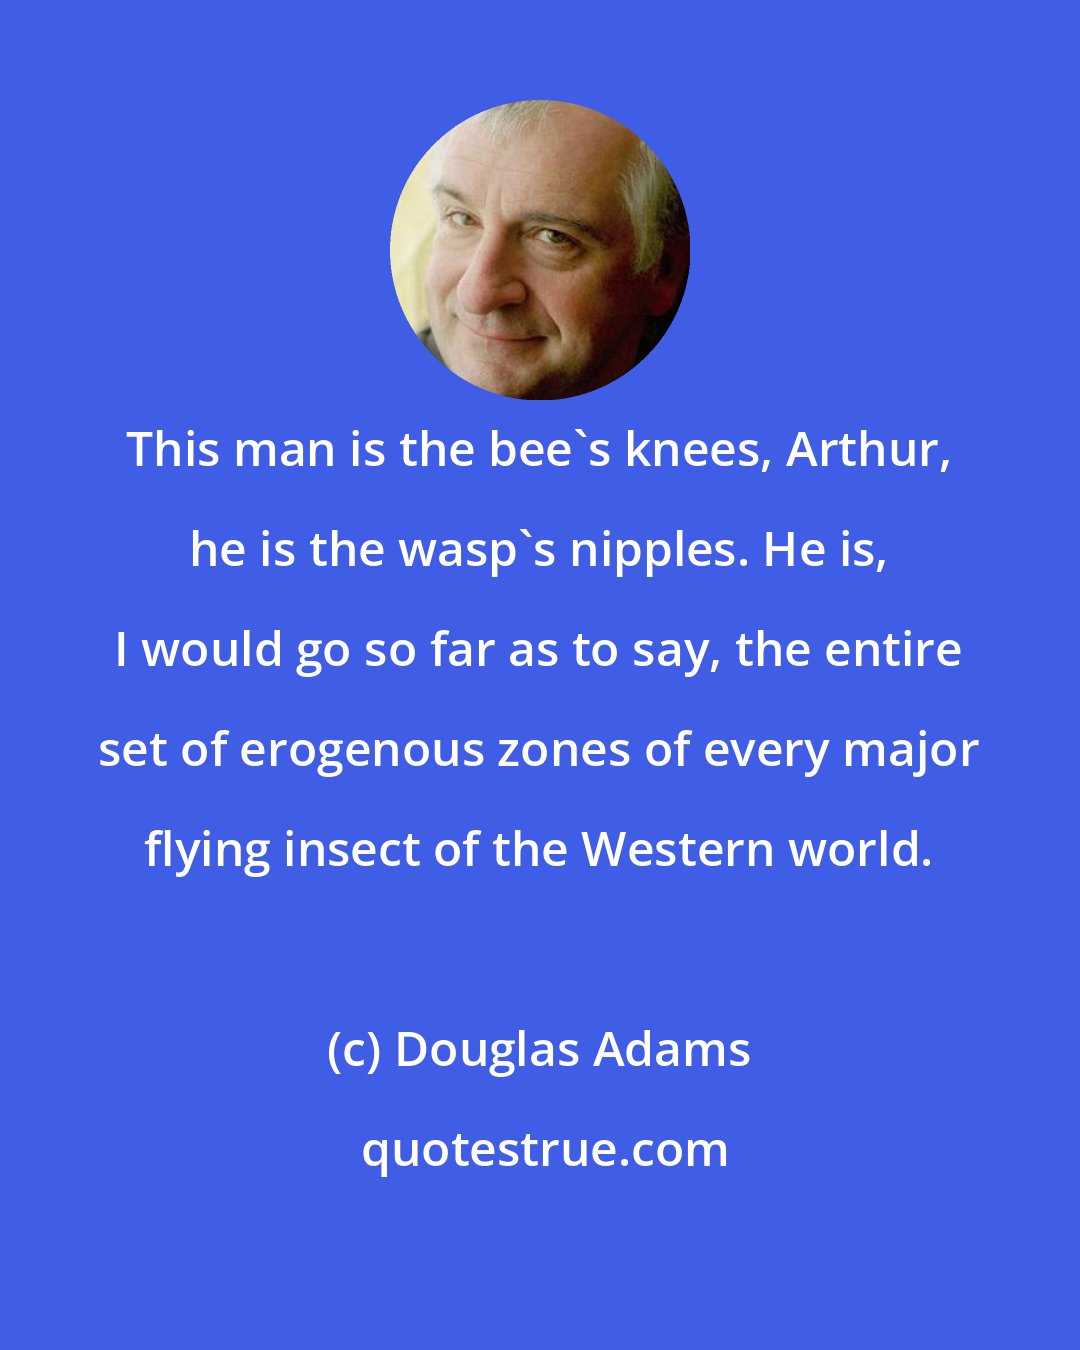 Douglas Adams: This man is the bee's knees, Arthur, he is the wasp's nipples. He is, I would go so far as to say, the entire set of erogenous zones of every major flying insect of the Western world.